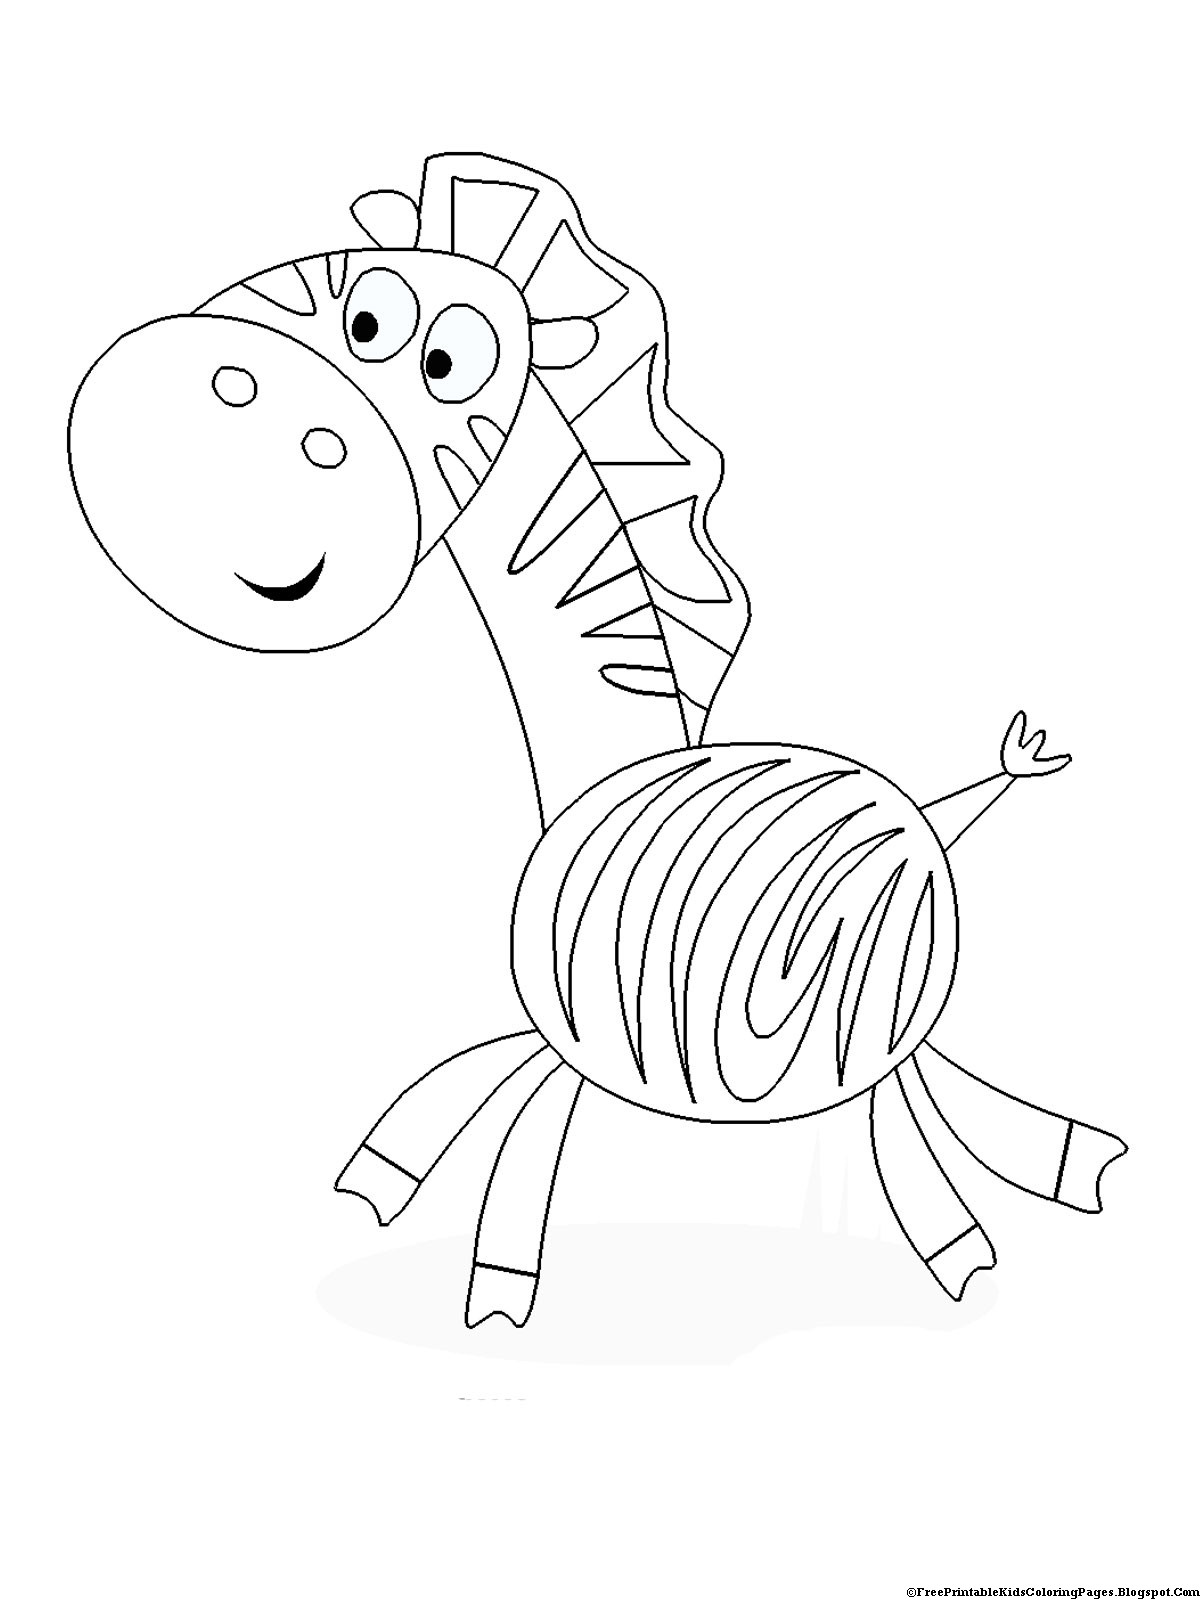 Printable Coloring Book Pages
 Zebra Coloring Pages Free Printable Kids Coloring Pages